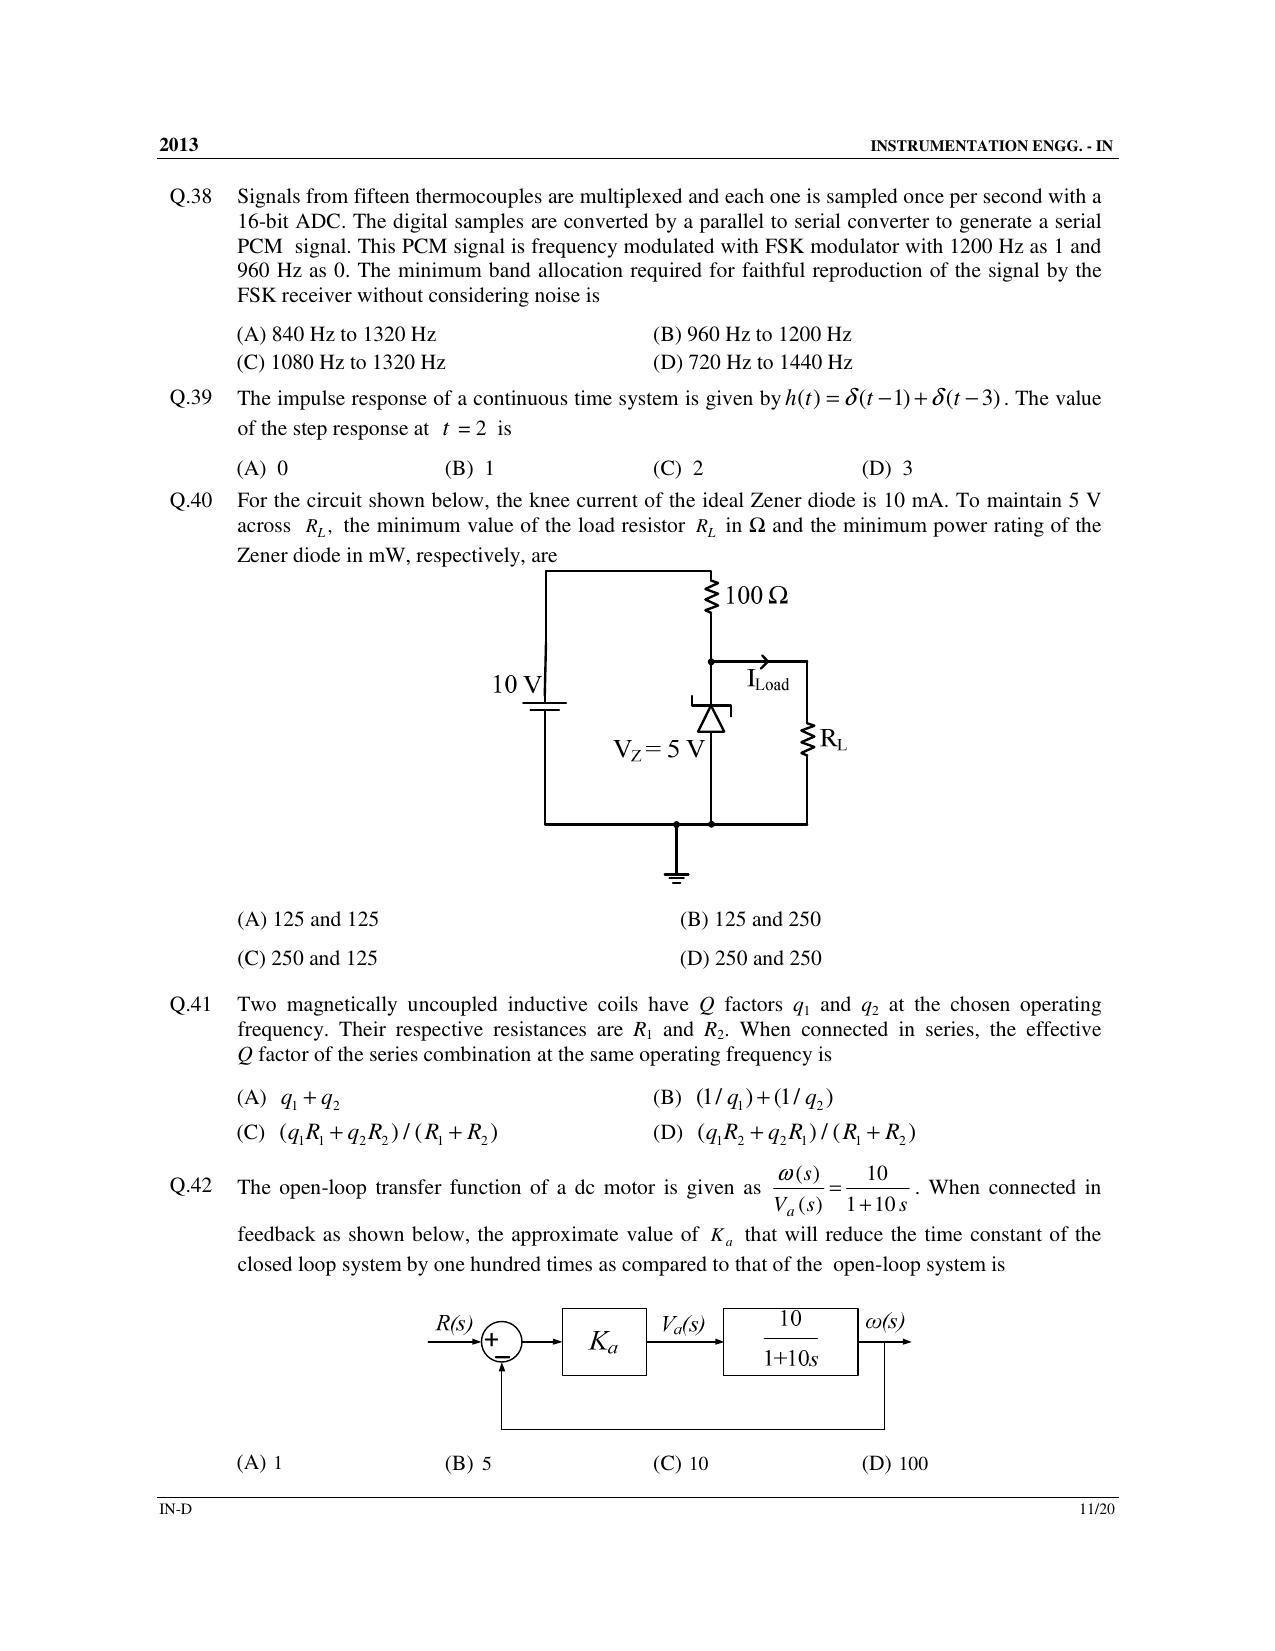 GATE 2013 Instrumentation Engineering (IN) Question Paper with Answer Key - Page 63